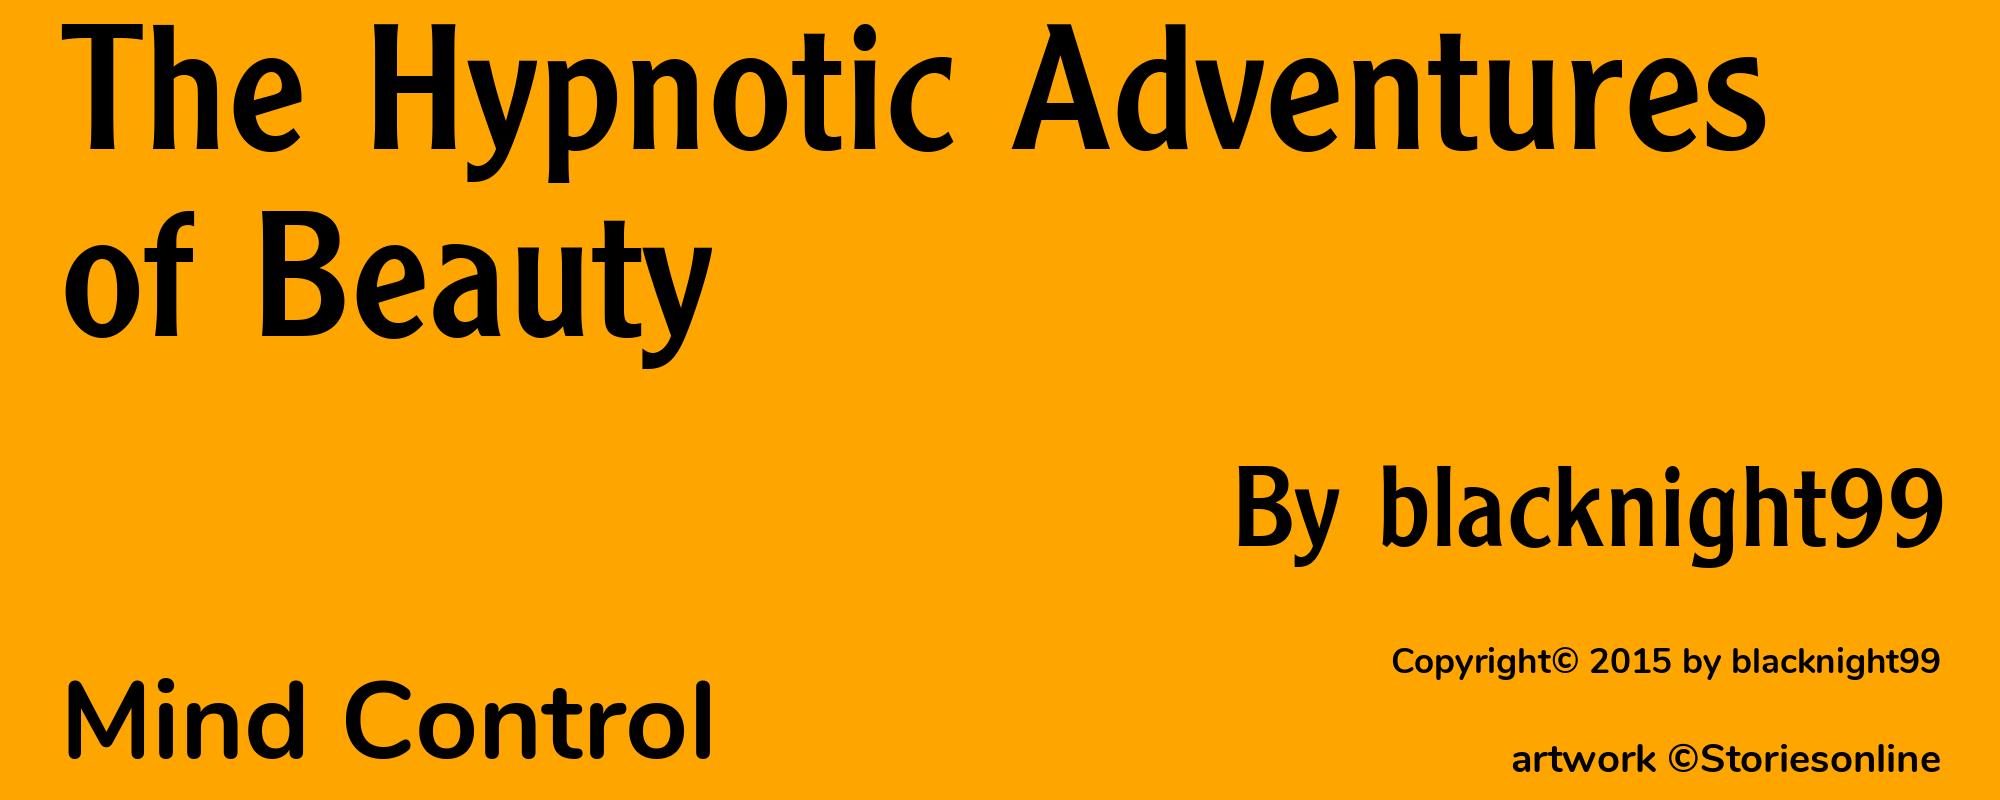 The Hypnotic Adventures of Beauty - Cover